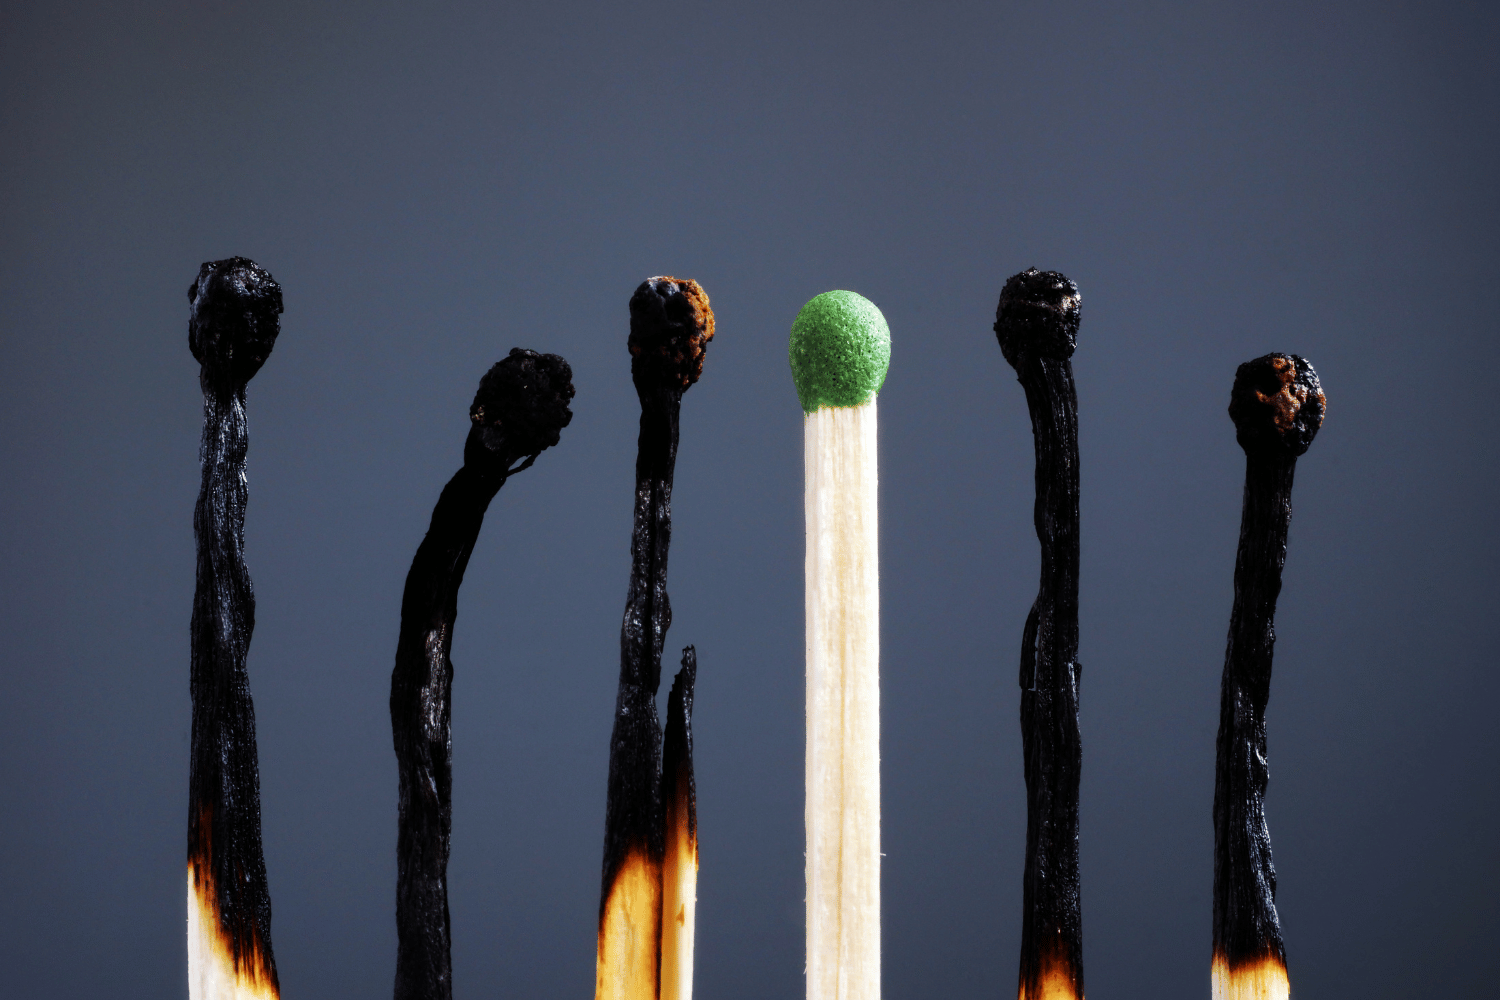 5 burned matchsticks and one unused matchstick